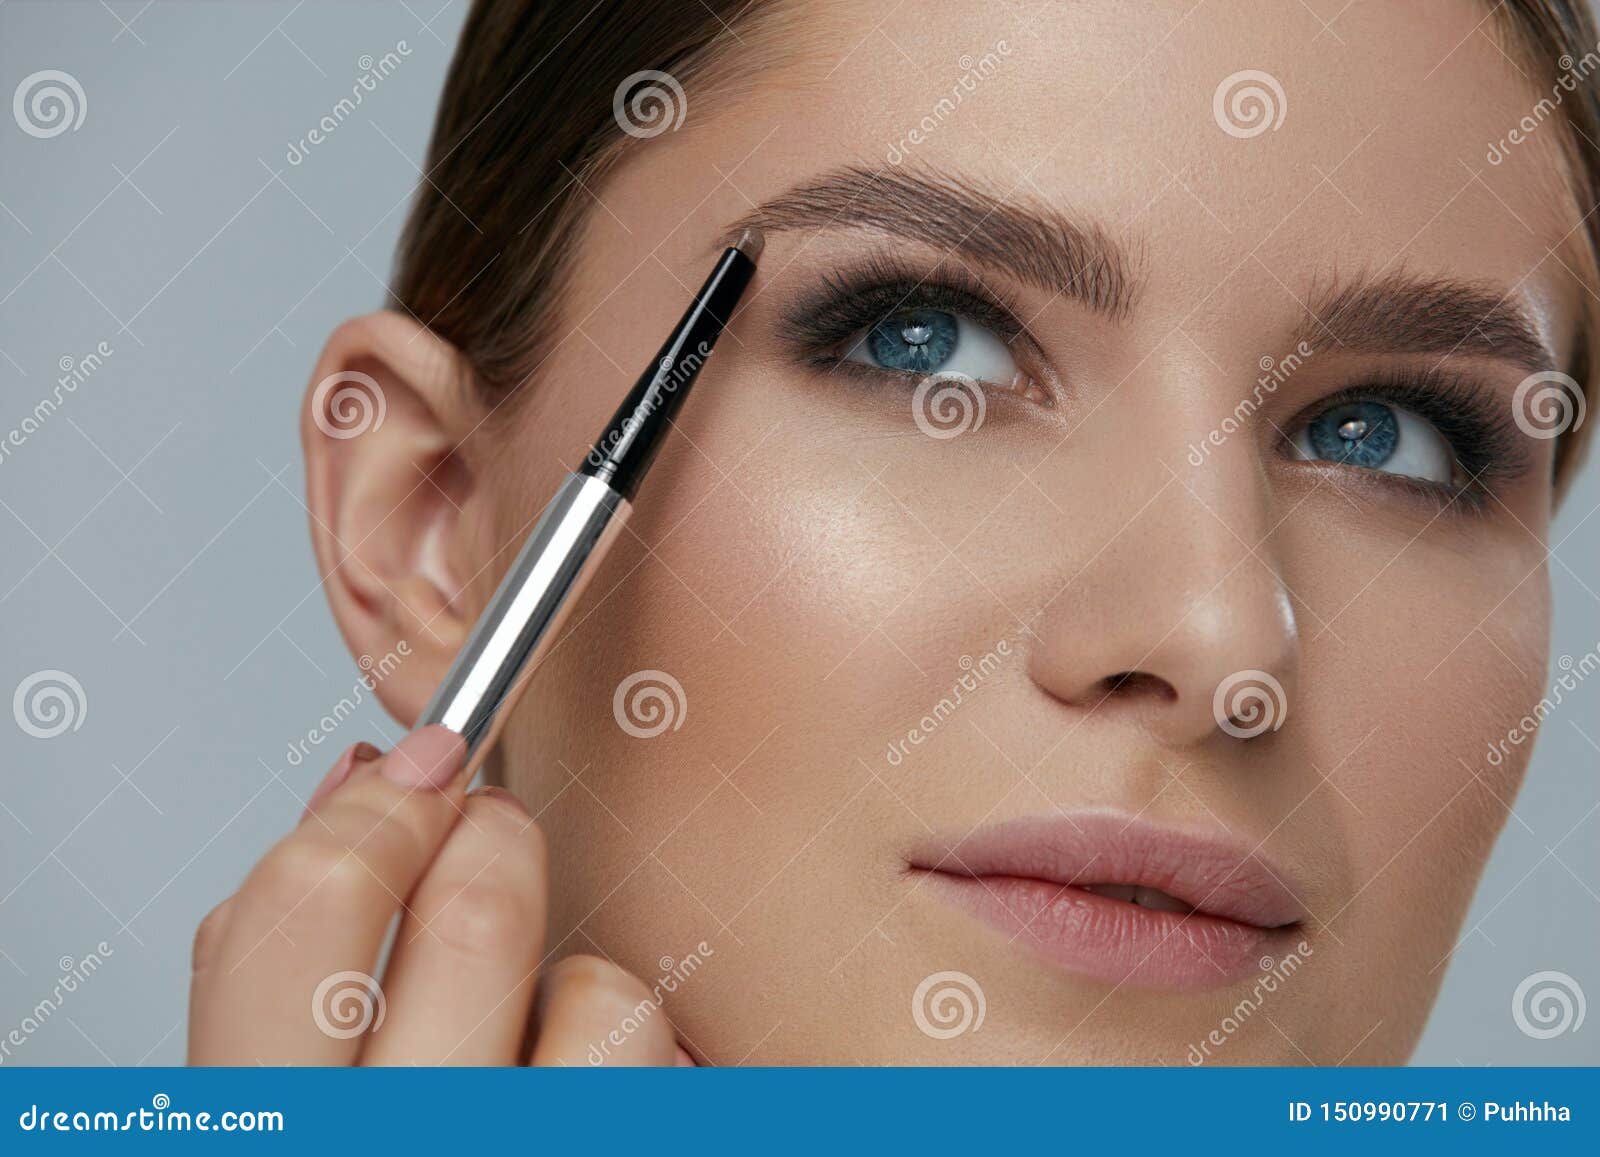 eyebrow makeup. beauty model shaping brows with brow pencil